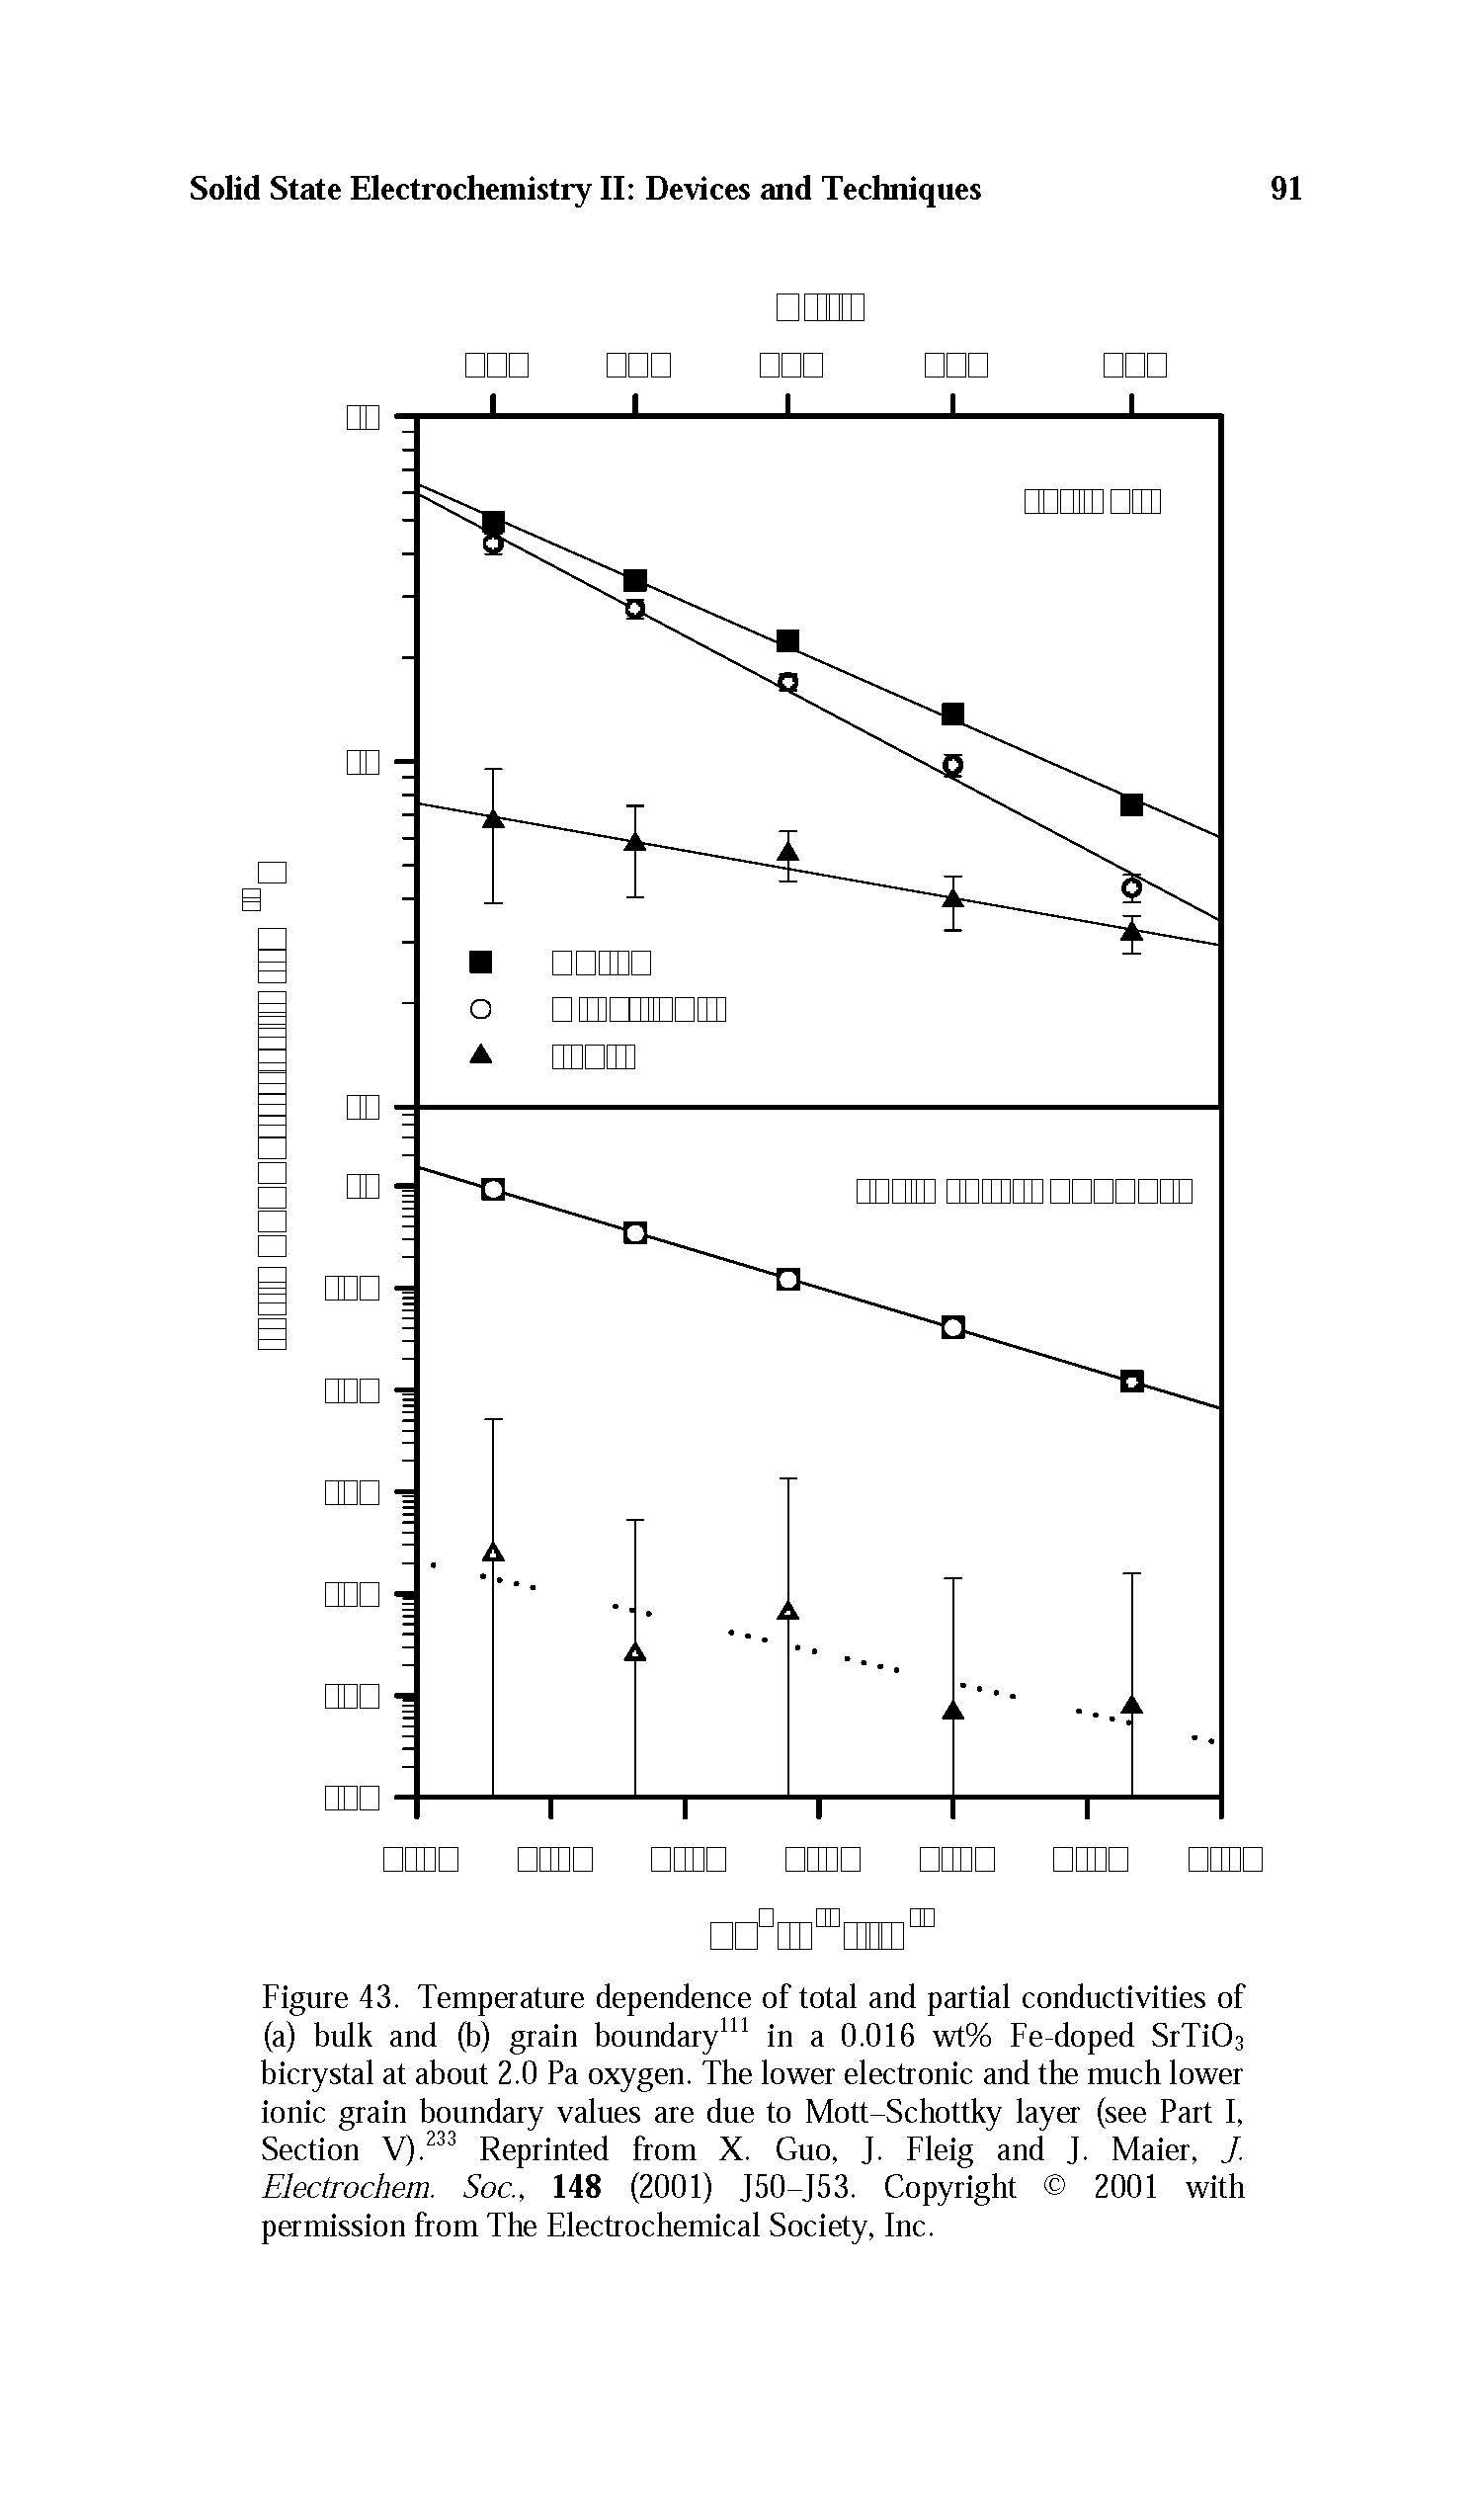 Figure 43. Temperature dependence of total and partial conductivities of (a) bulk and (b) grain boundary111 in a 0.016 wt% Fe-doped SrTi03 bicrystal at about 2.0 Pa oxygen. The lower electronic and the much lower ionic grain boundary values are due to Mott-Schottky layer (see Part I, Section V).233 Reprinted from X. Guo, J. Fleig and J. Maier, J. Electrochem. Soc., 148 (2001) J50-J53. Copyright 2001 with permission from The Electrochemical Society, Inc.